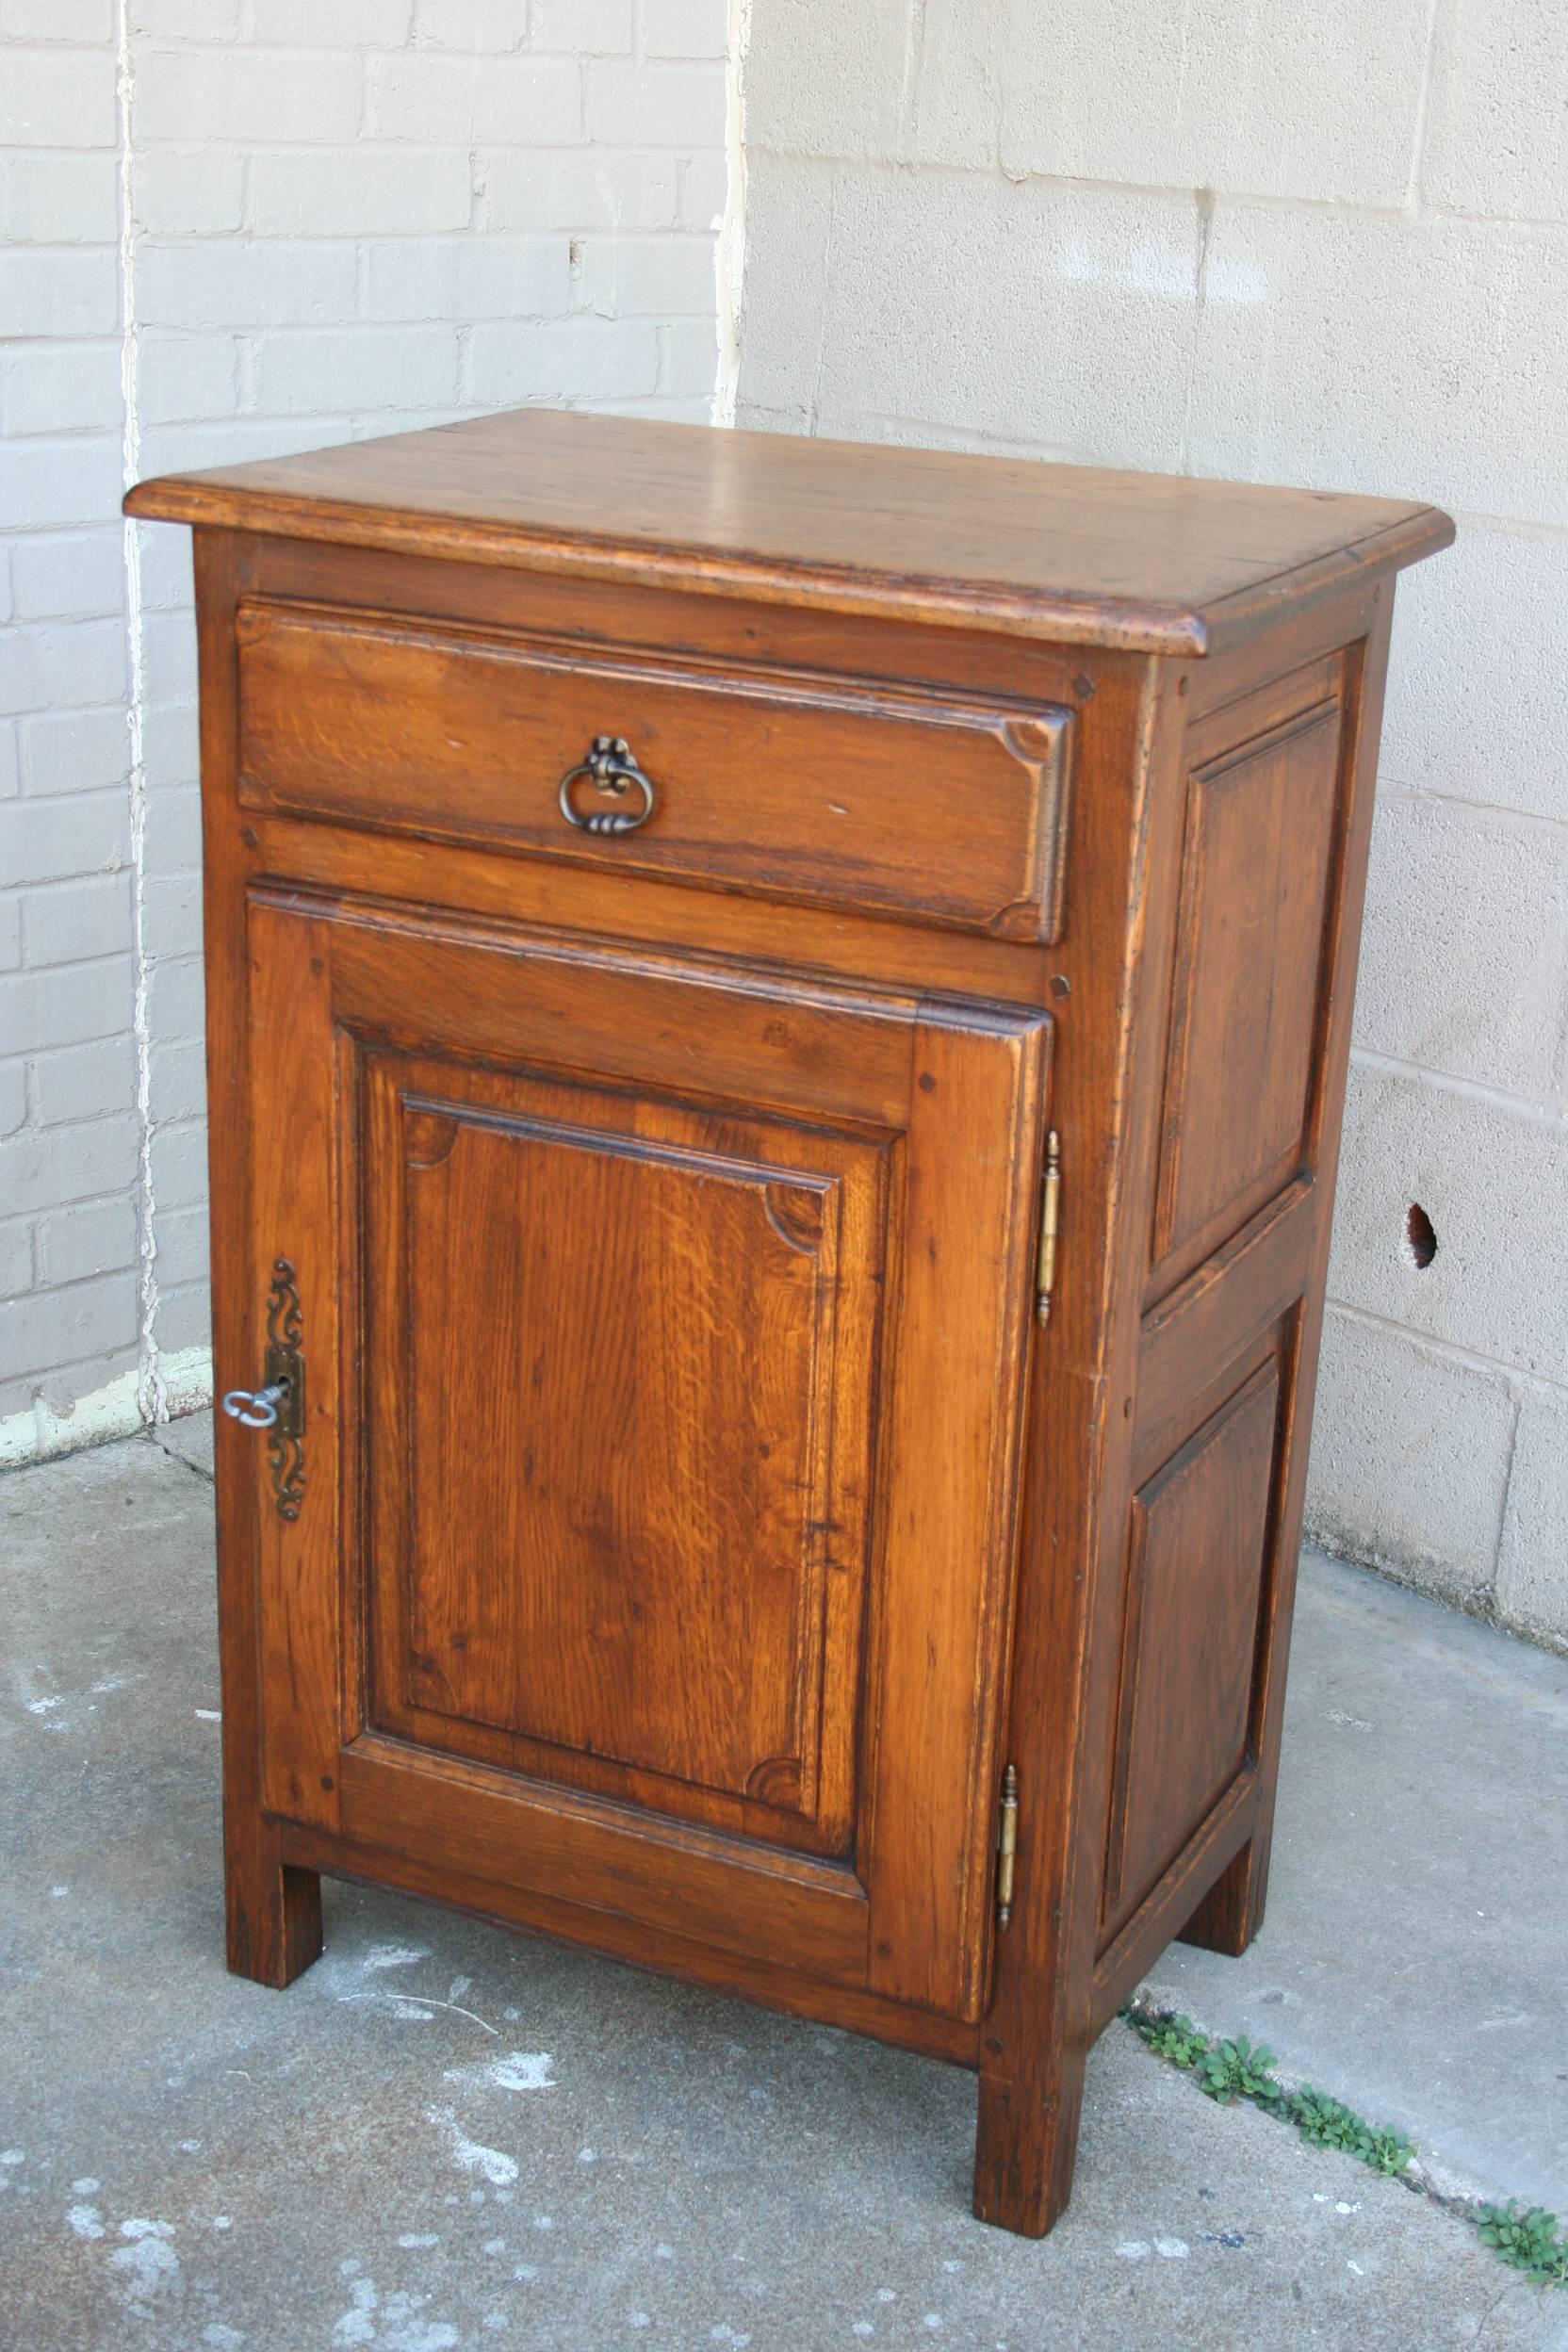 A warm and primitive feeling piece, this Louis XIV style jam cabinet is of a versatile scale for use in a pantry, as a side table, or as a nightstand. Beautifully aged, with hand pegged construction, this cabinet will add a sense of history and